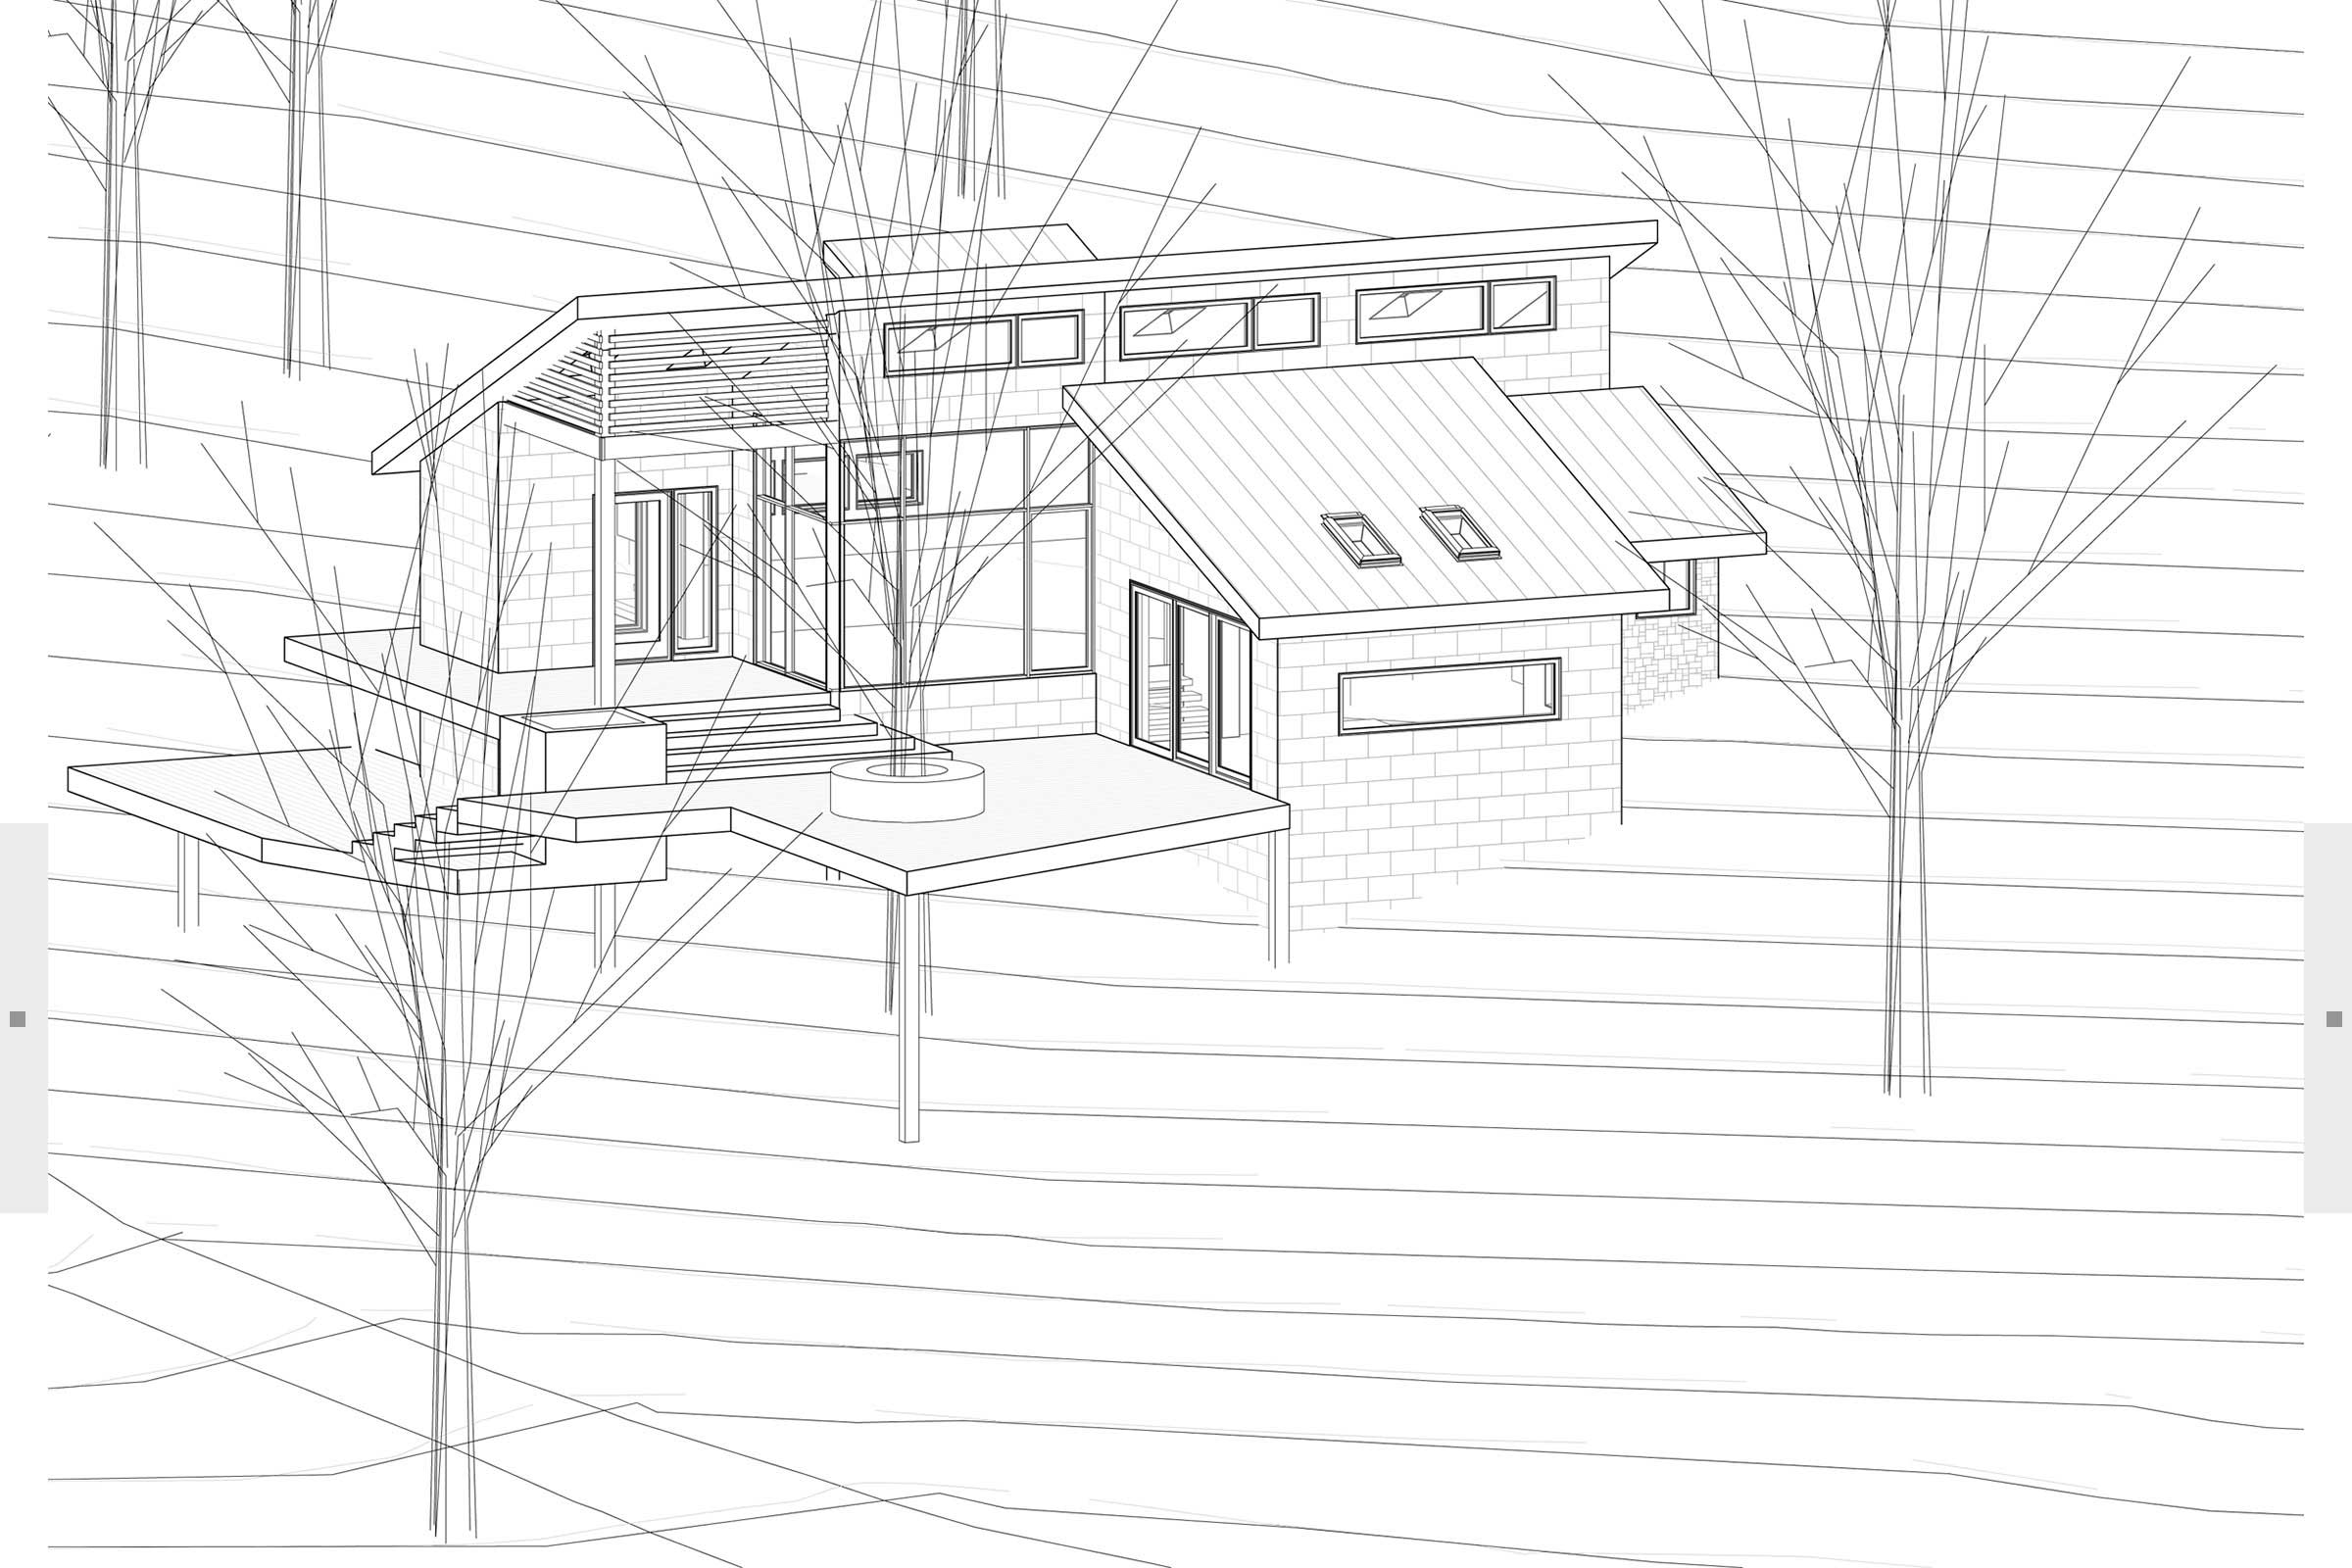 sketch of home in context of outdoor landscape